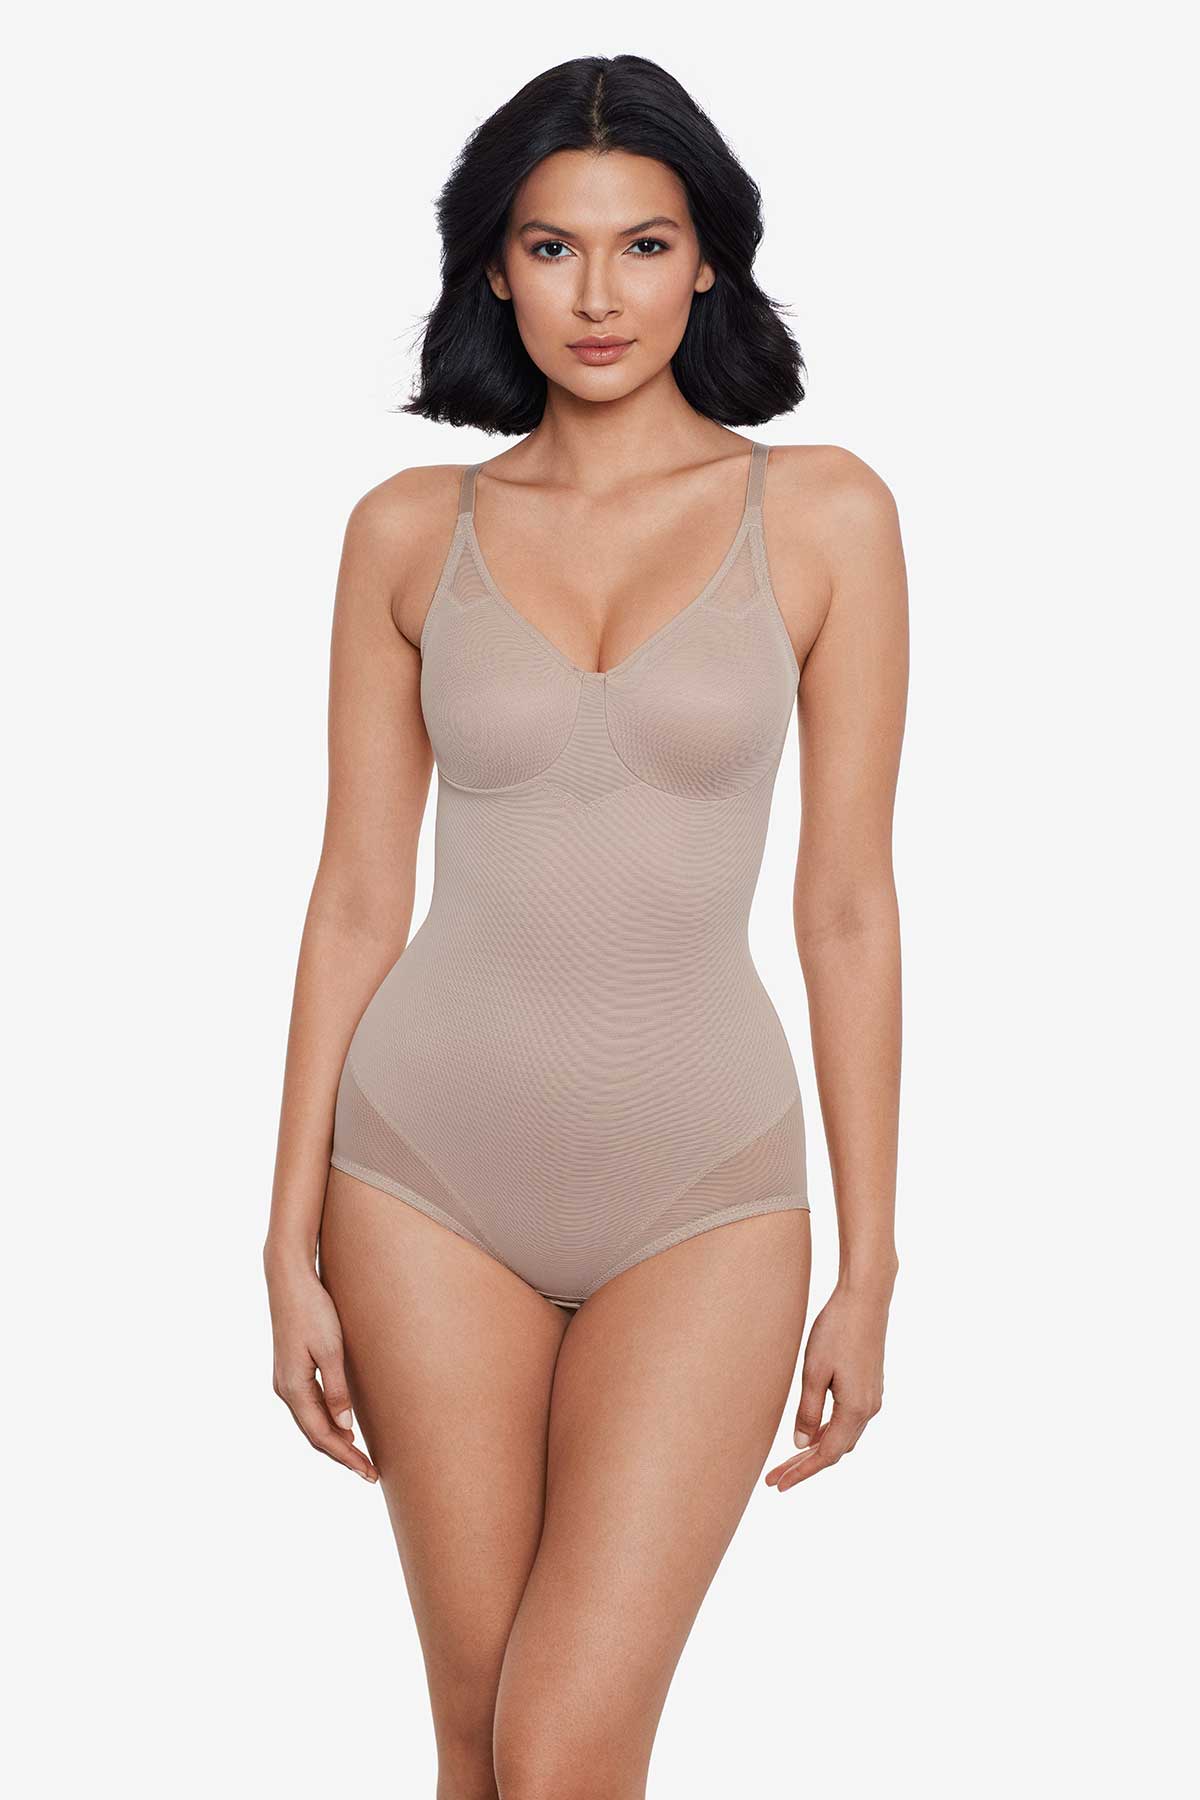 Miraclesuit 299325 Women Inches Off Waist Cincher - Nude - Shapewear XL